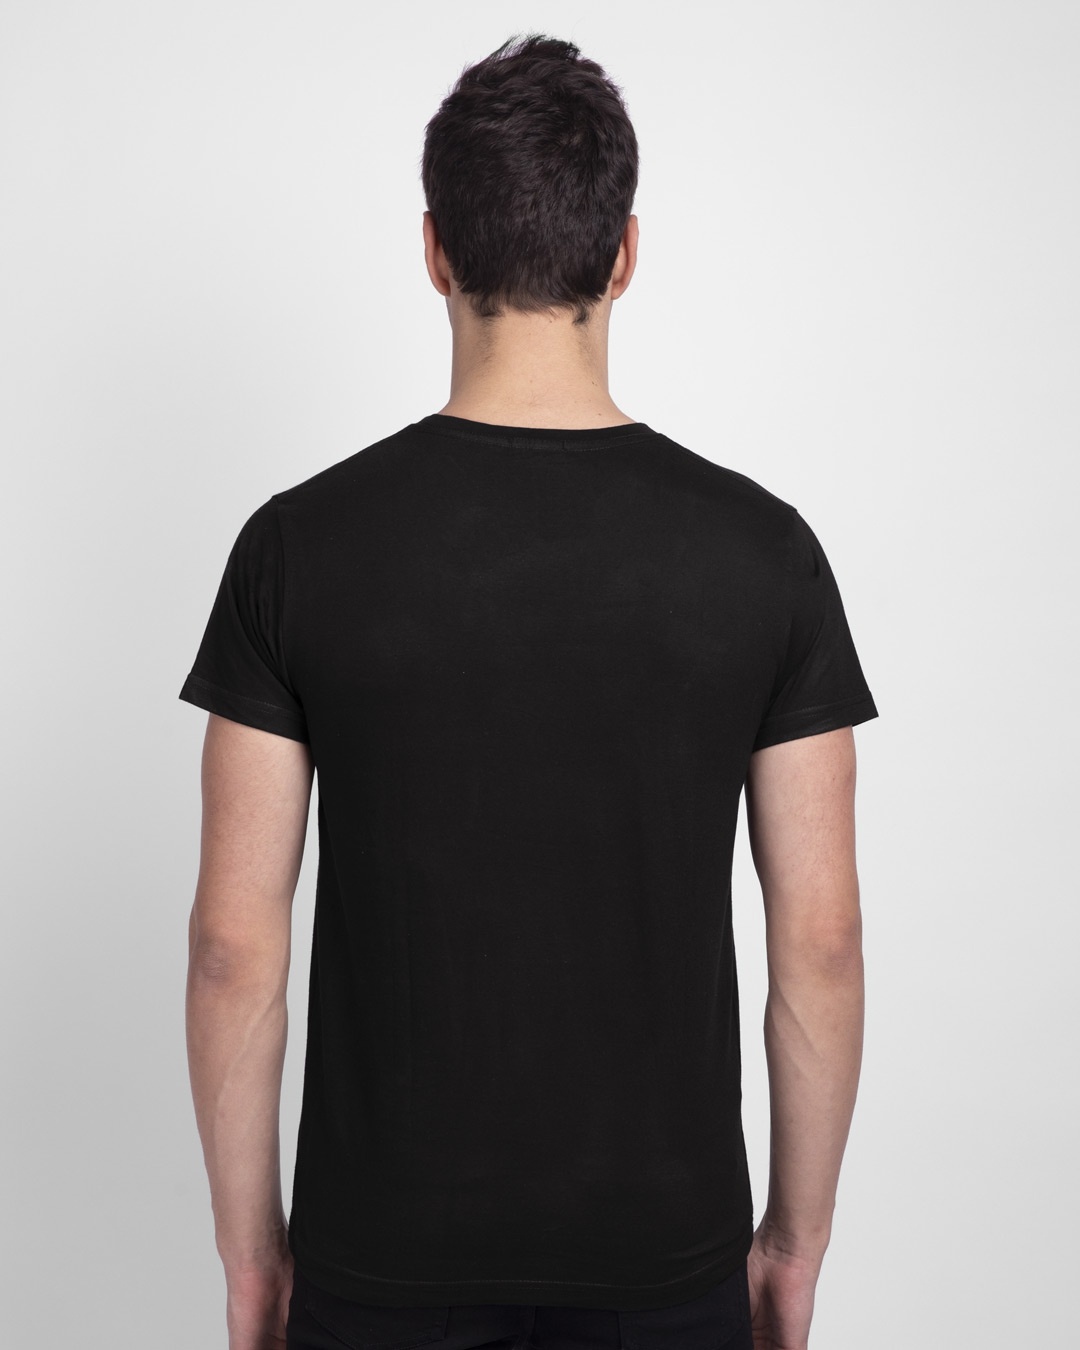 Shop Smart Is The New Cool Half Sleeve T-Shirt Black-Back